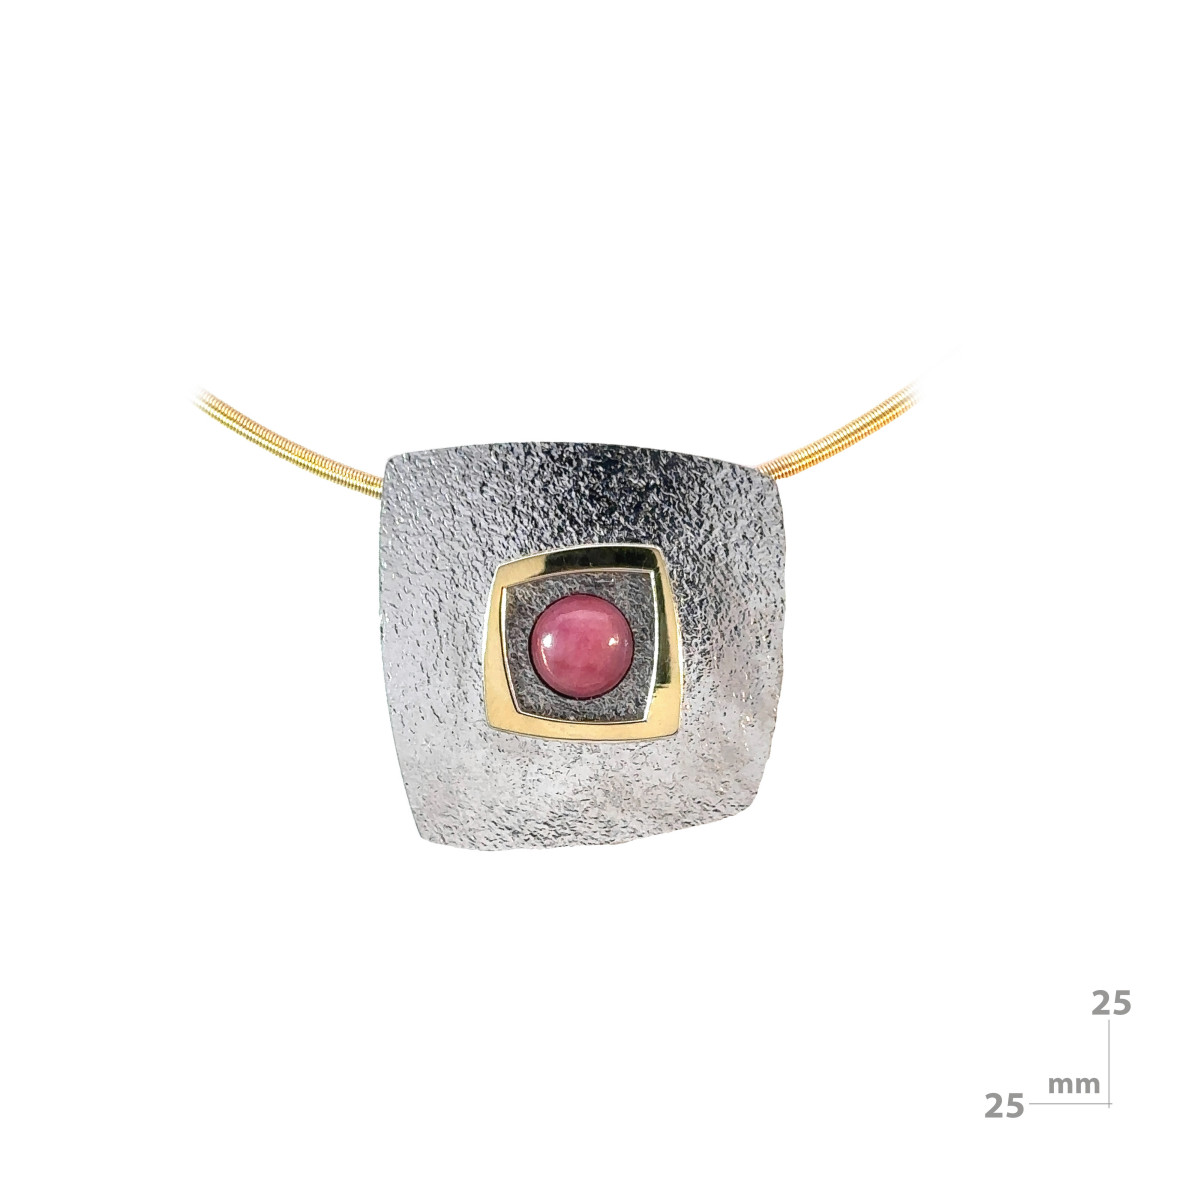 Silver, gold and rhodonite pendant